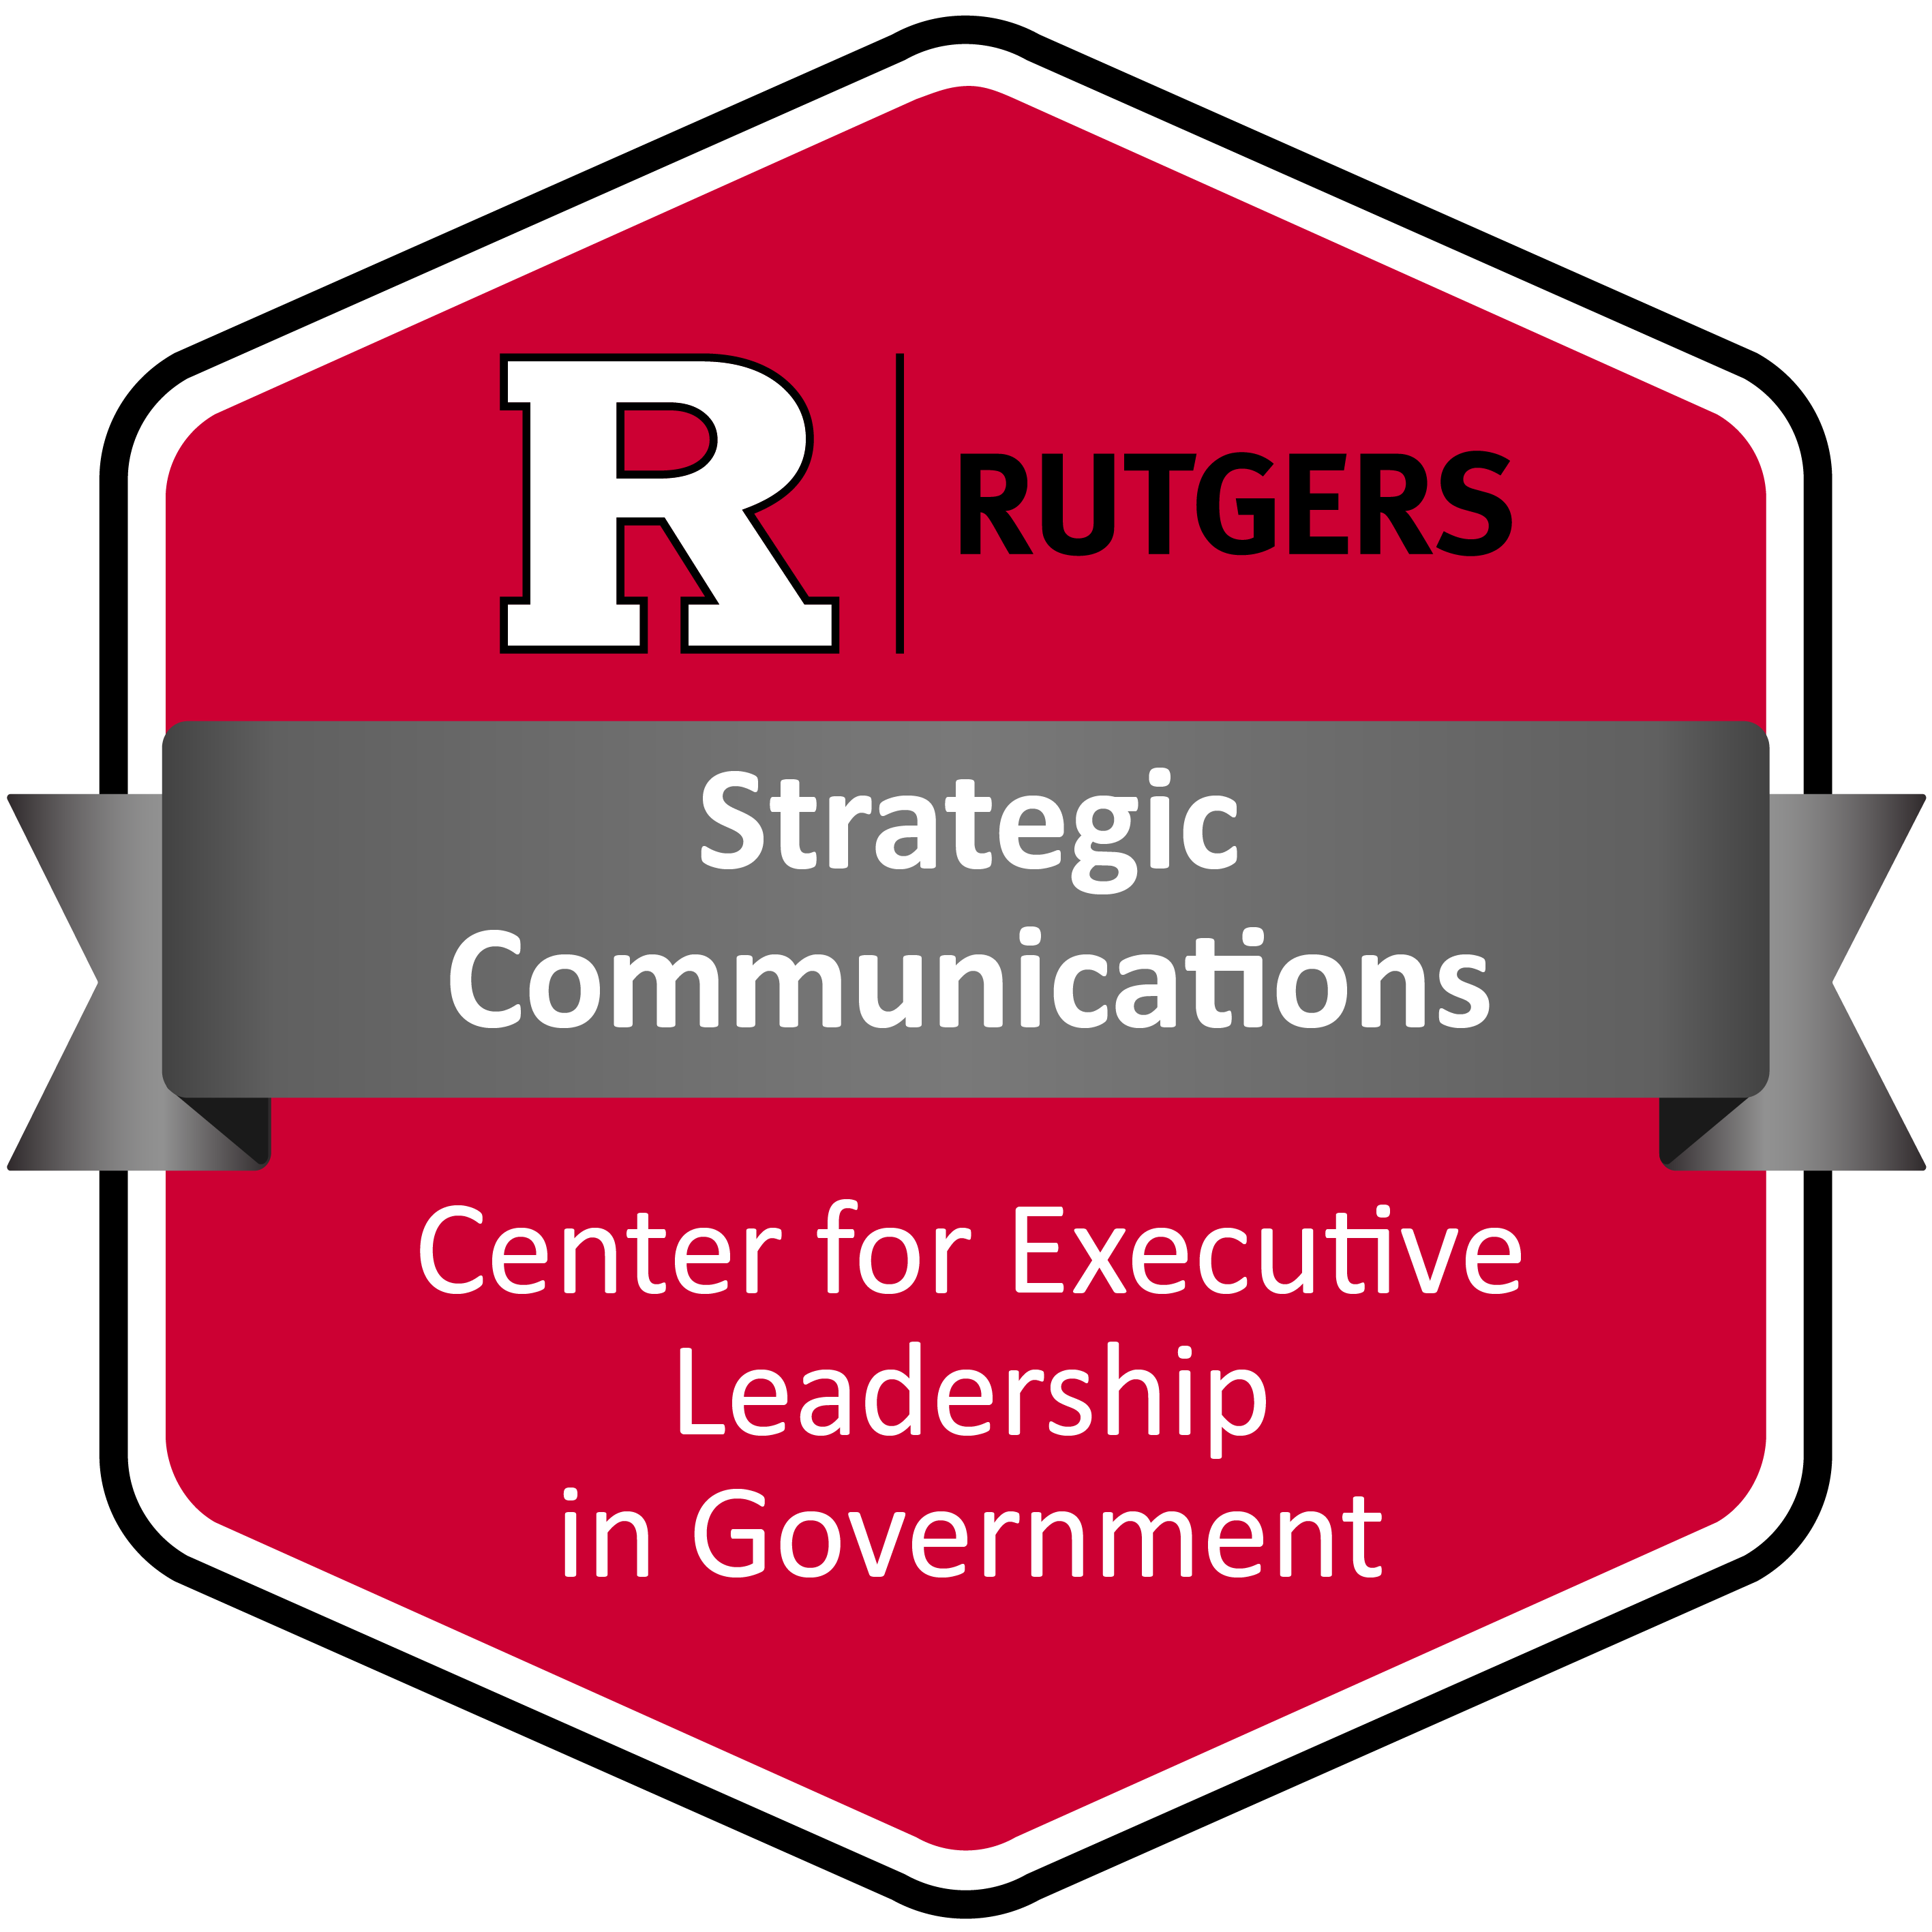 red hexagon with black border which reads "Rutgers Strategic Communications Center for Executive Leadership in Government"